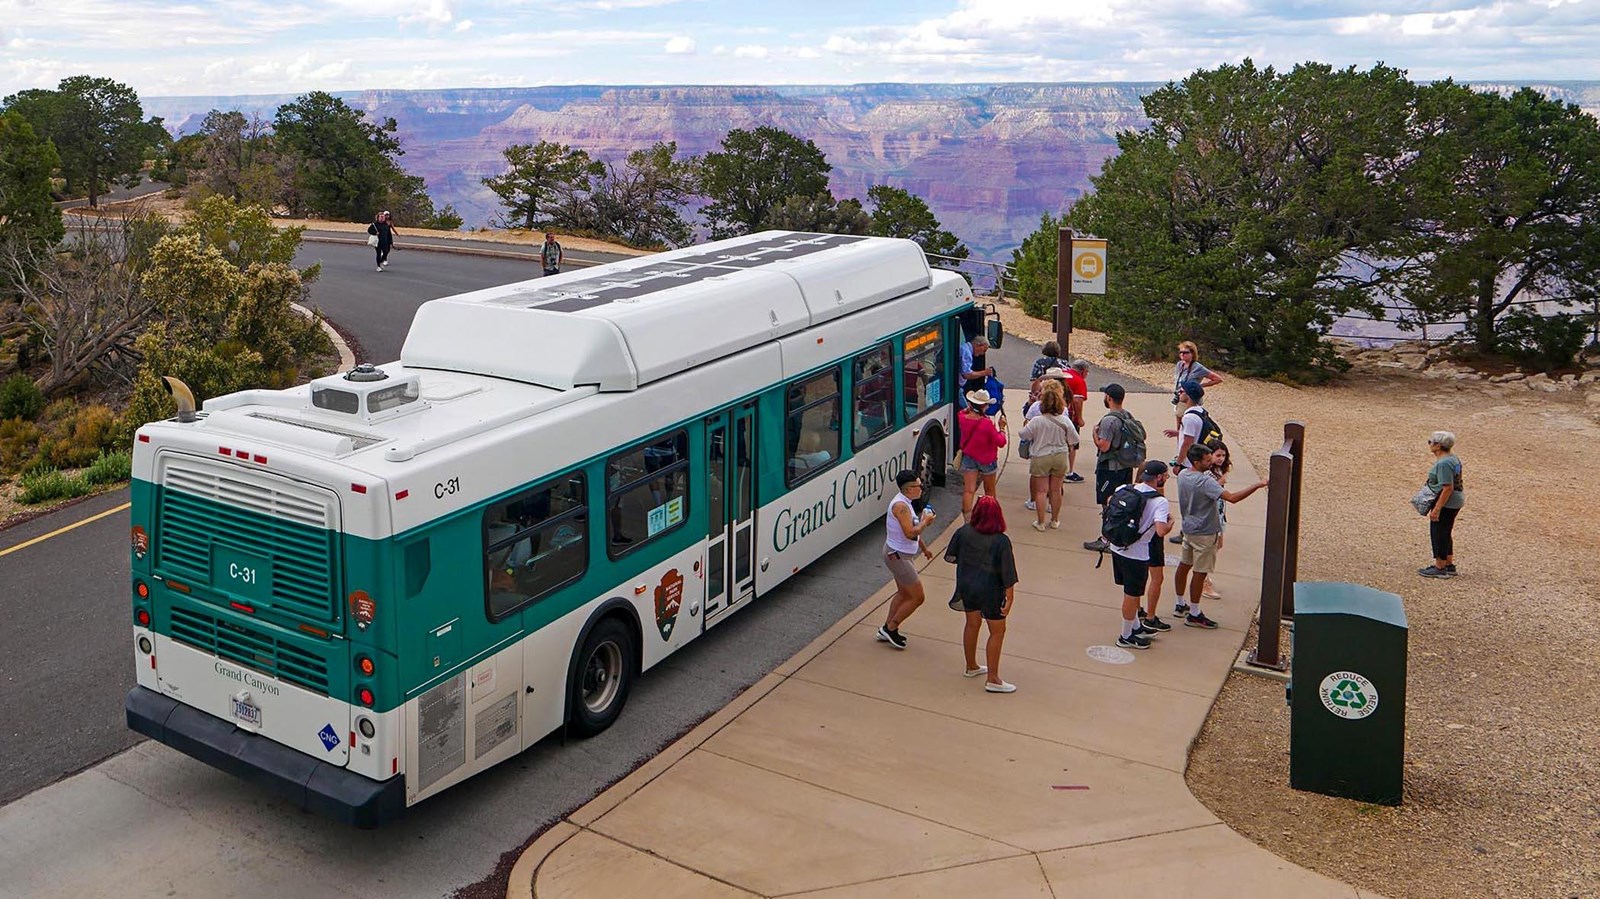 a green and white bus with passengers at a bus stop with a vast canyon landscape in the distance.